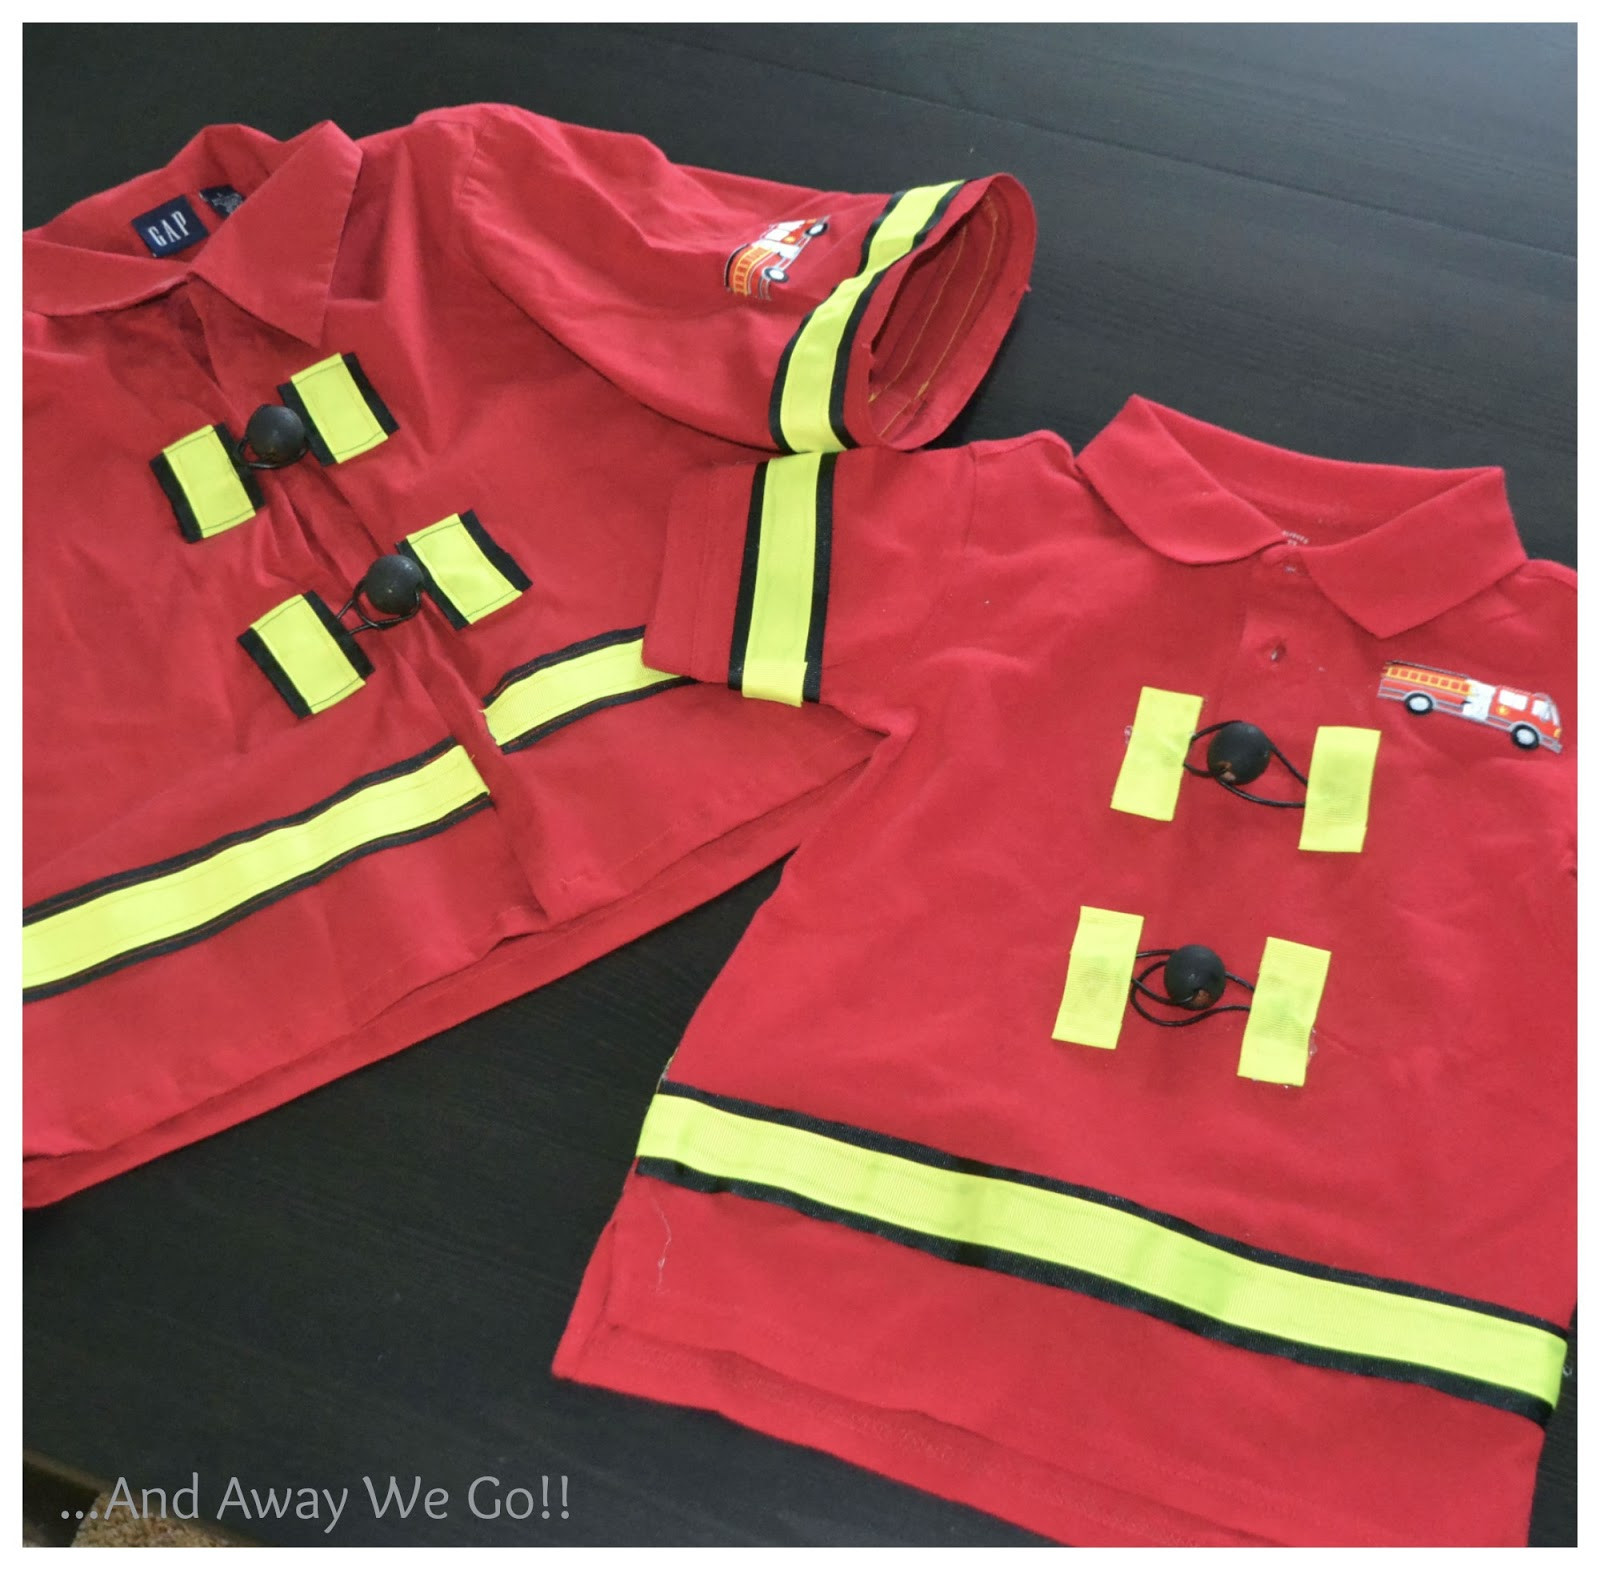 Firefighter Costume DIY
 and away we go DIY Firefighter Costume